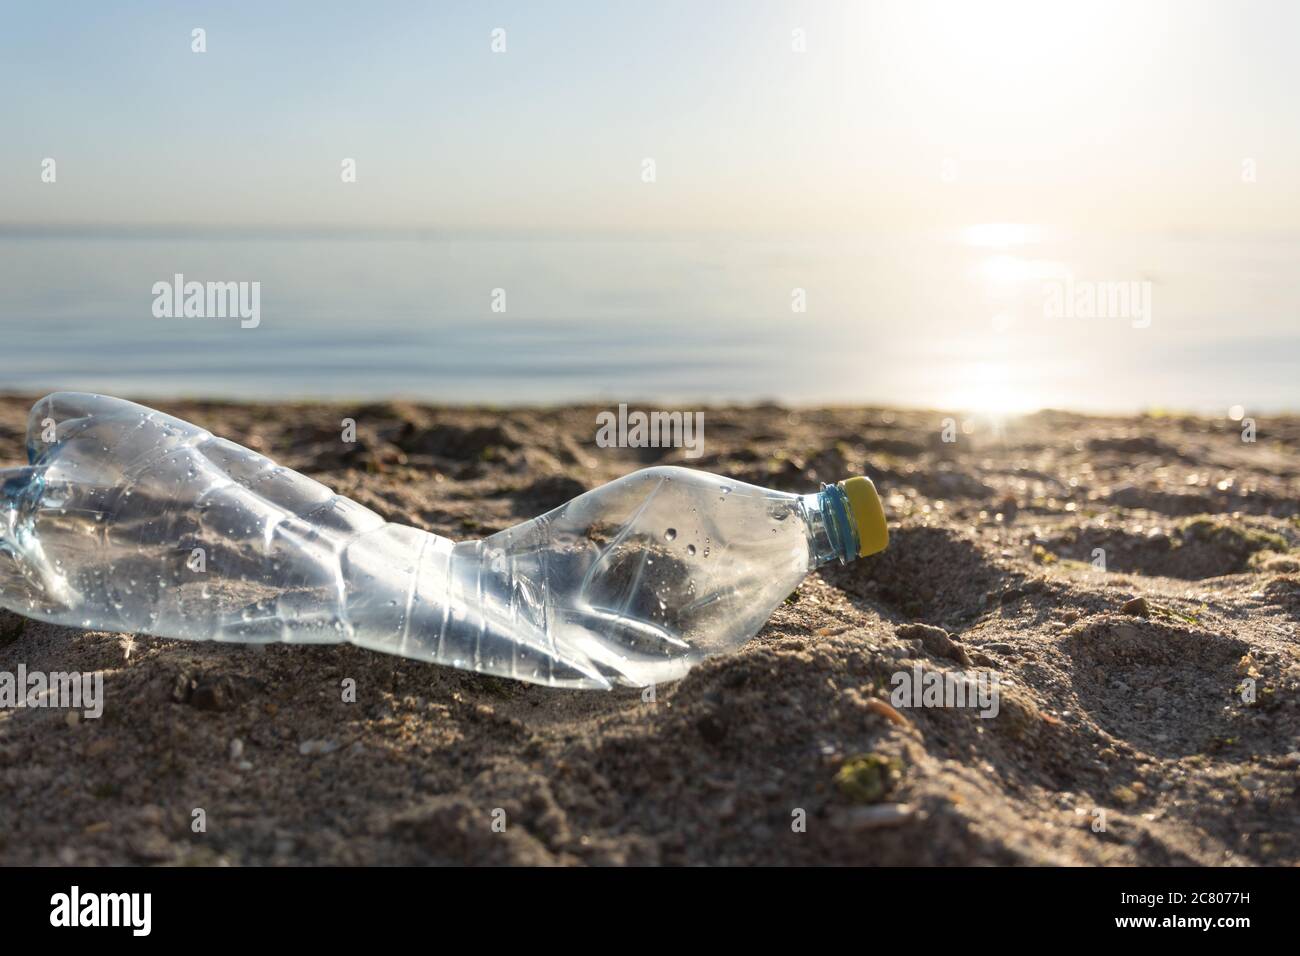 Wasted Single-Use Plastic Bottle Lying On Beach Polluting Environment Outdoors Stock Photo